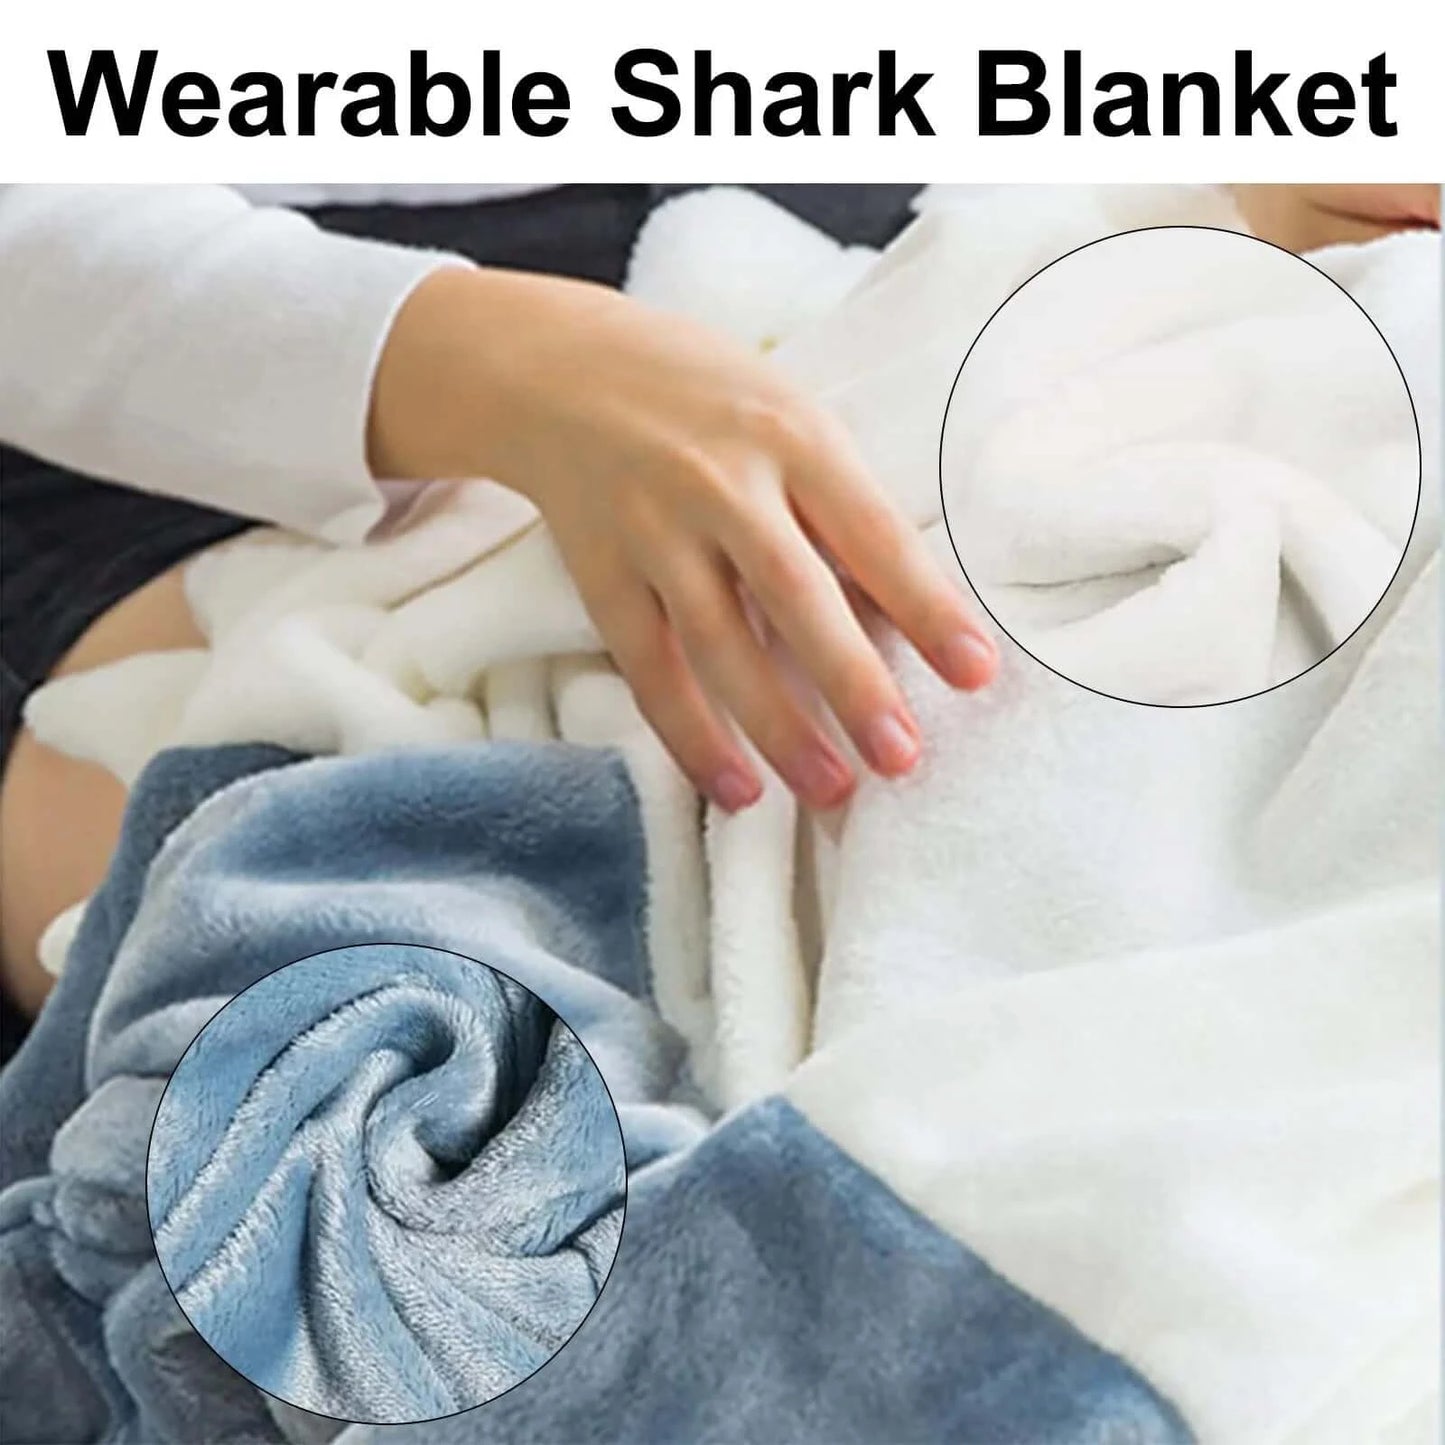 Snuggle with Jaws: Shark-Shaped Wearable Blanket